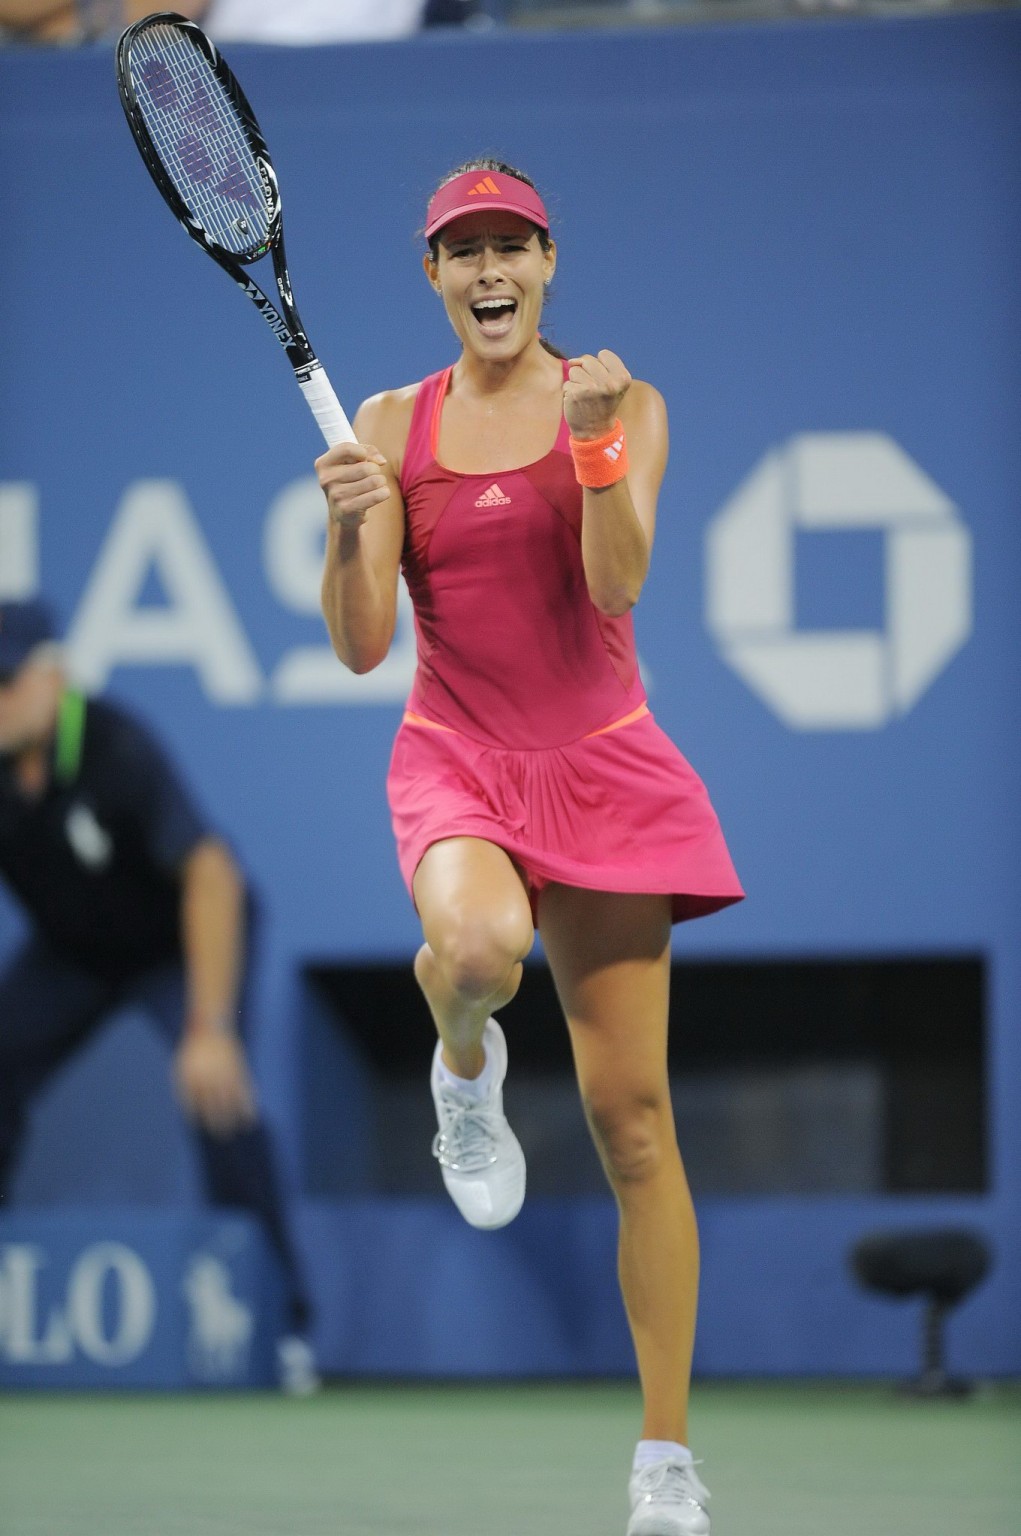 Ana Ivanovic showing cameltoe at the US Open in New York #75289087